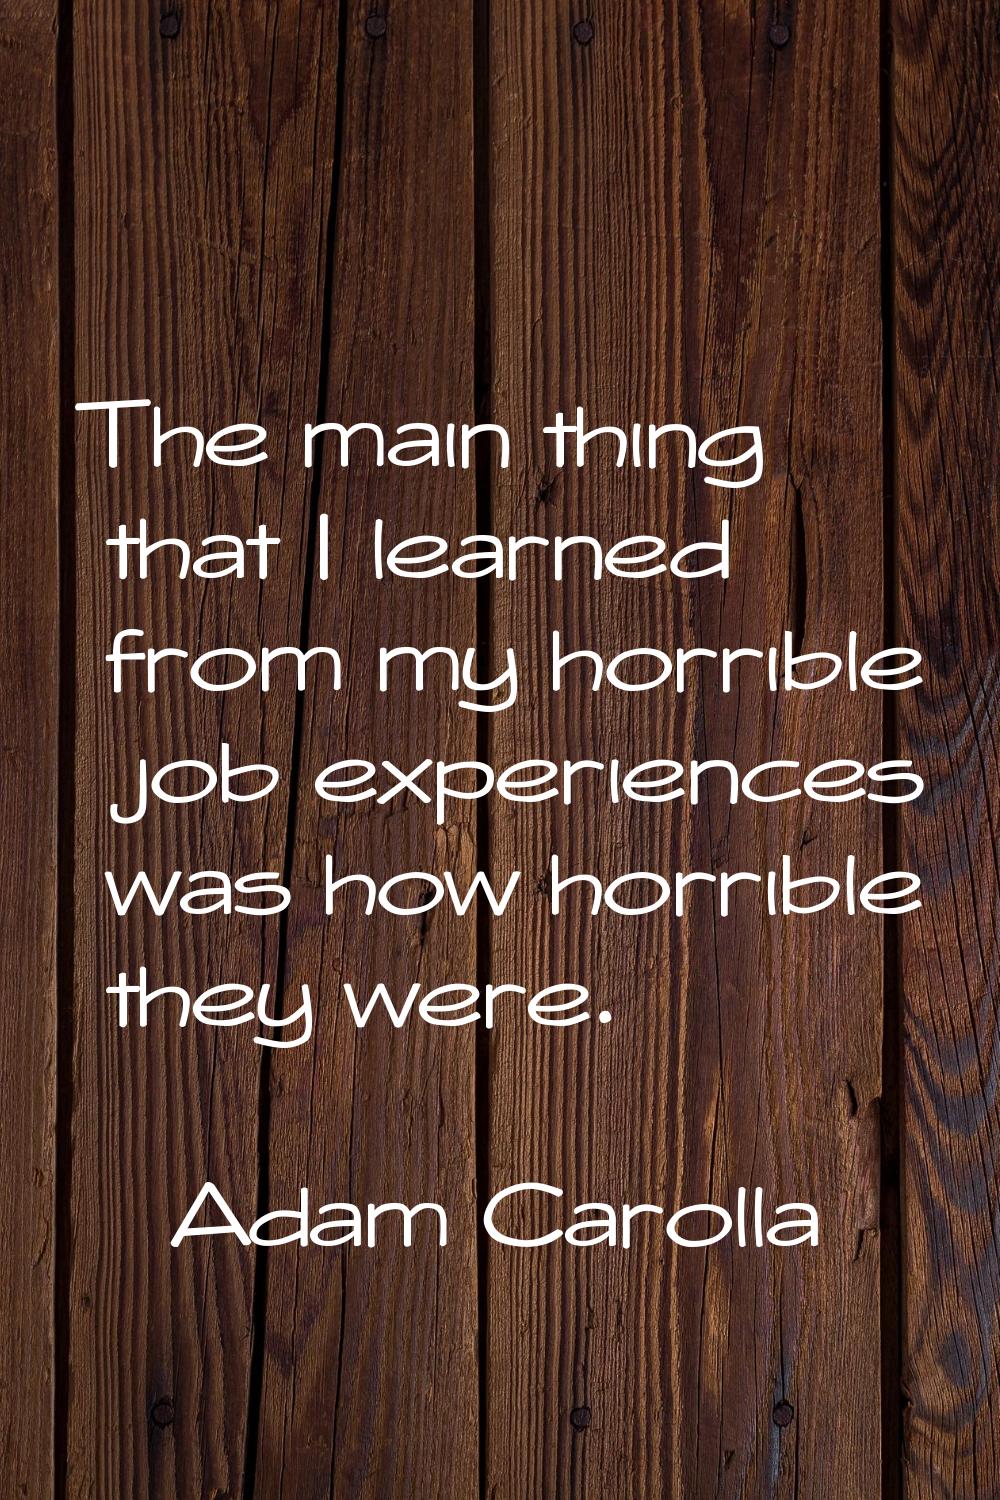 The main thing that I learned from my horrible job experiences was how horrible they were.